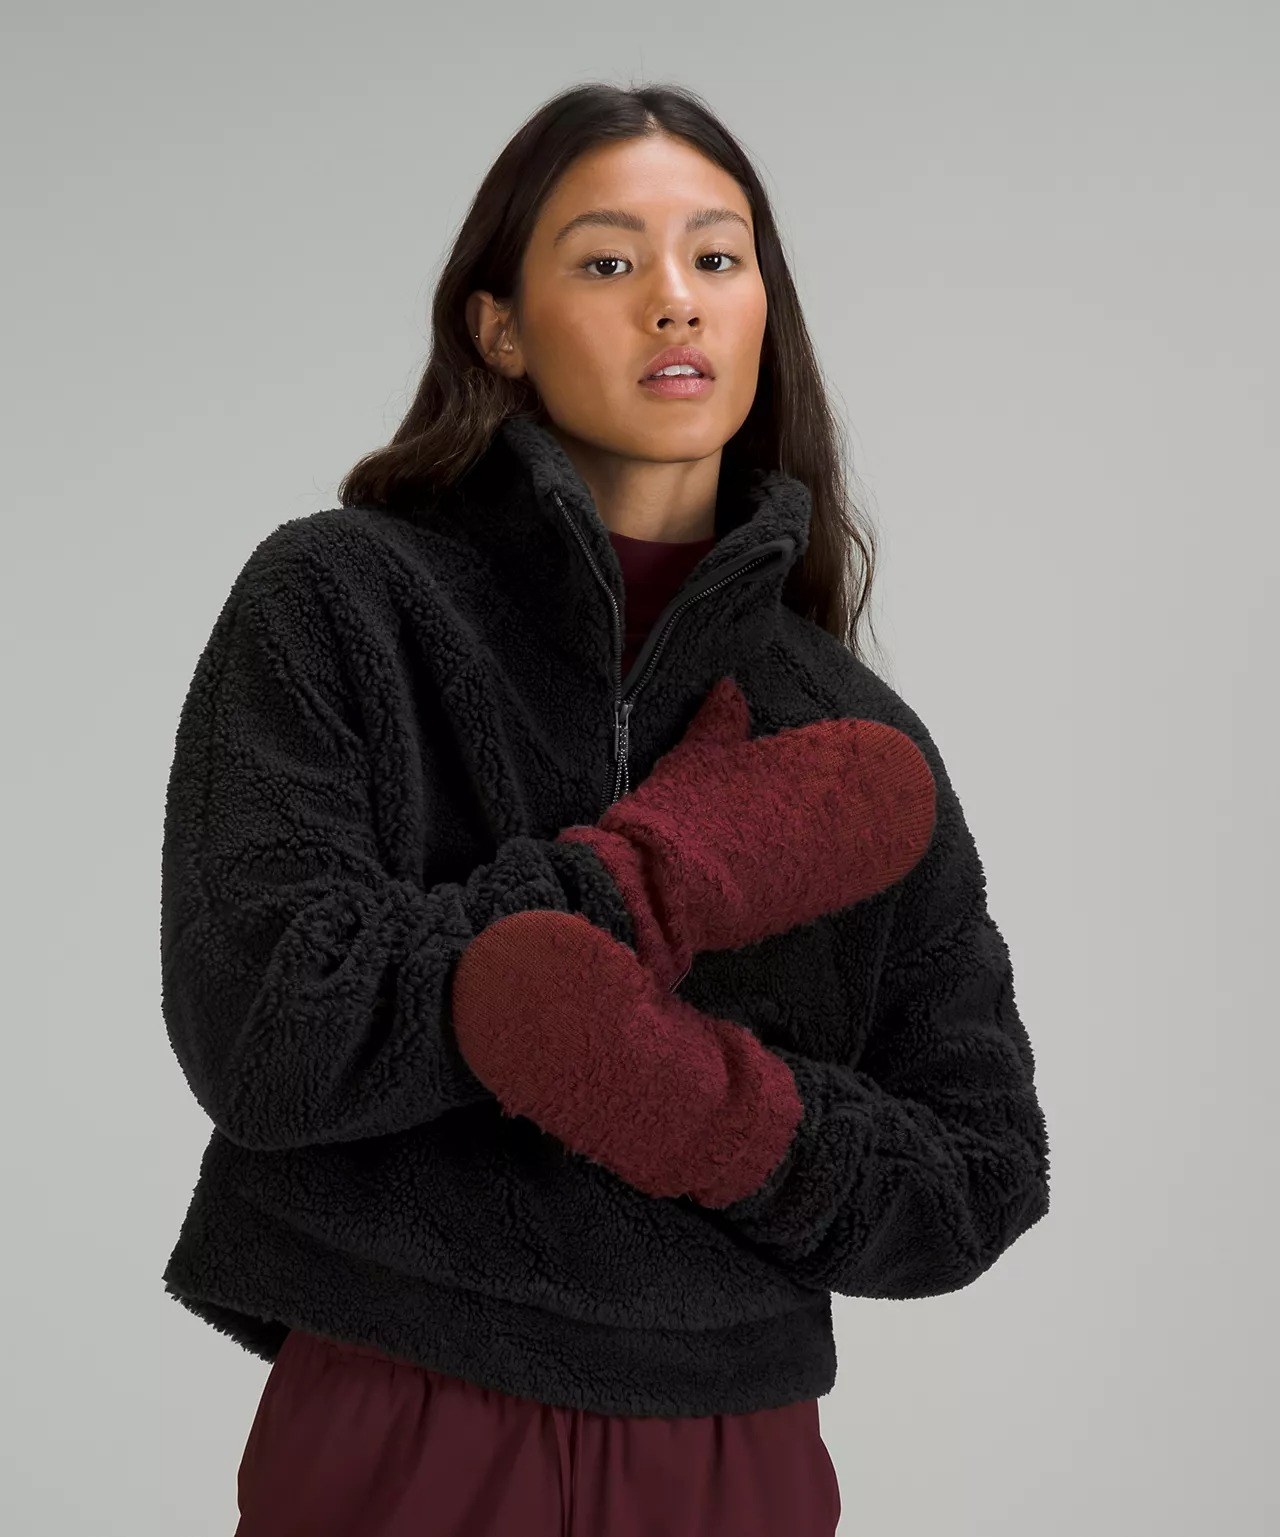 a model wearing the burgundy mittens